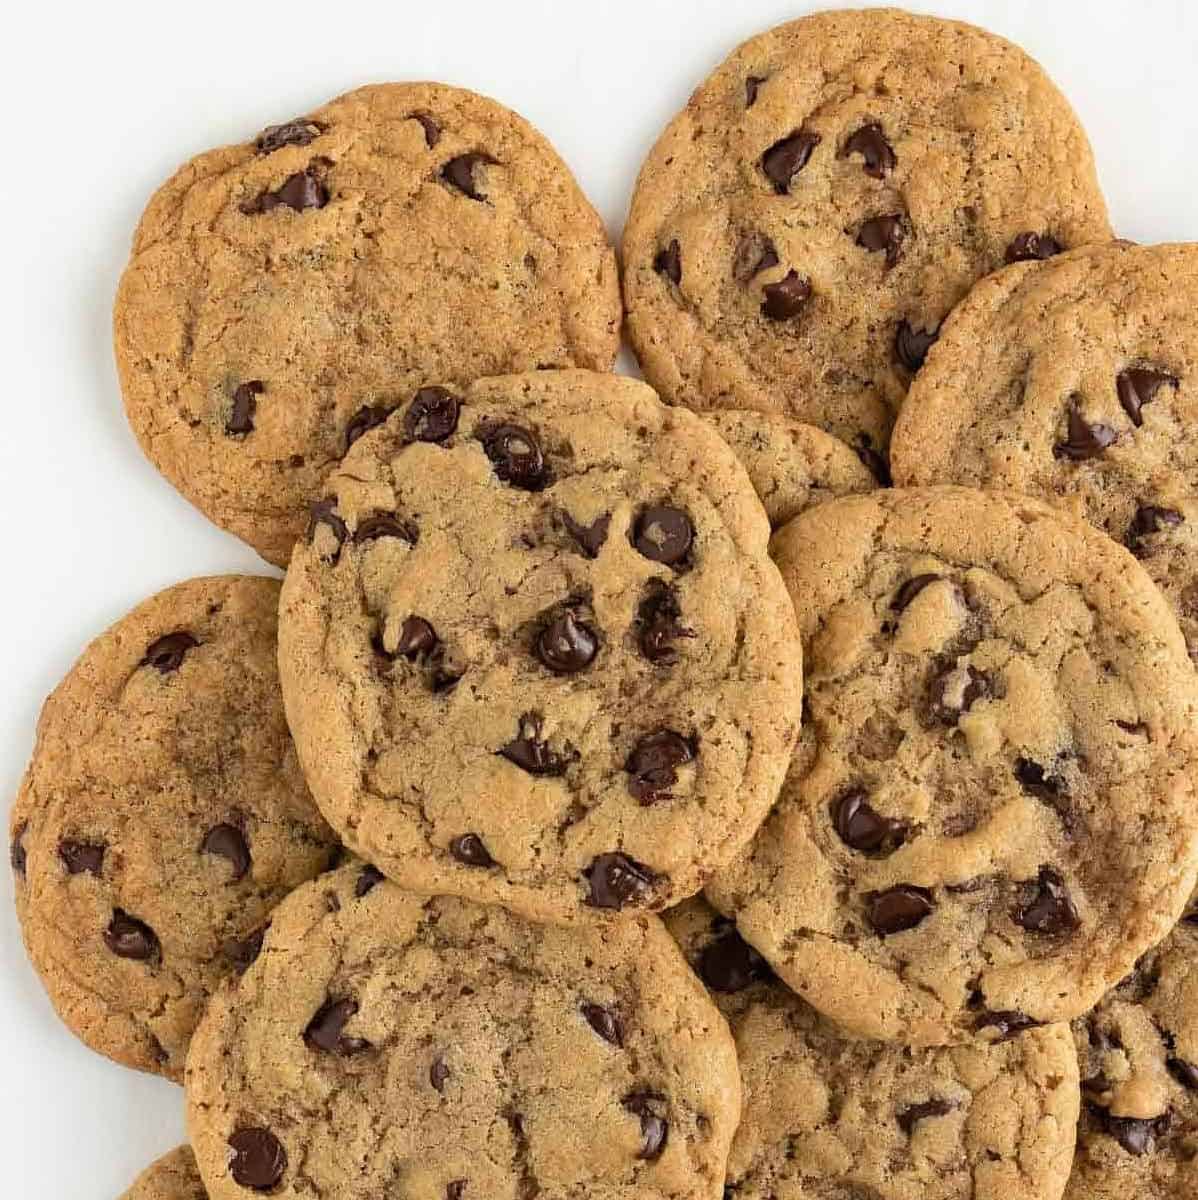  These cookies are proof that you don't have to compromise taste to eat vegan!